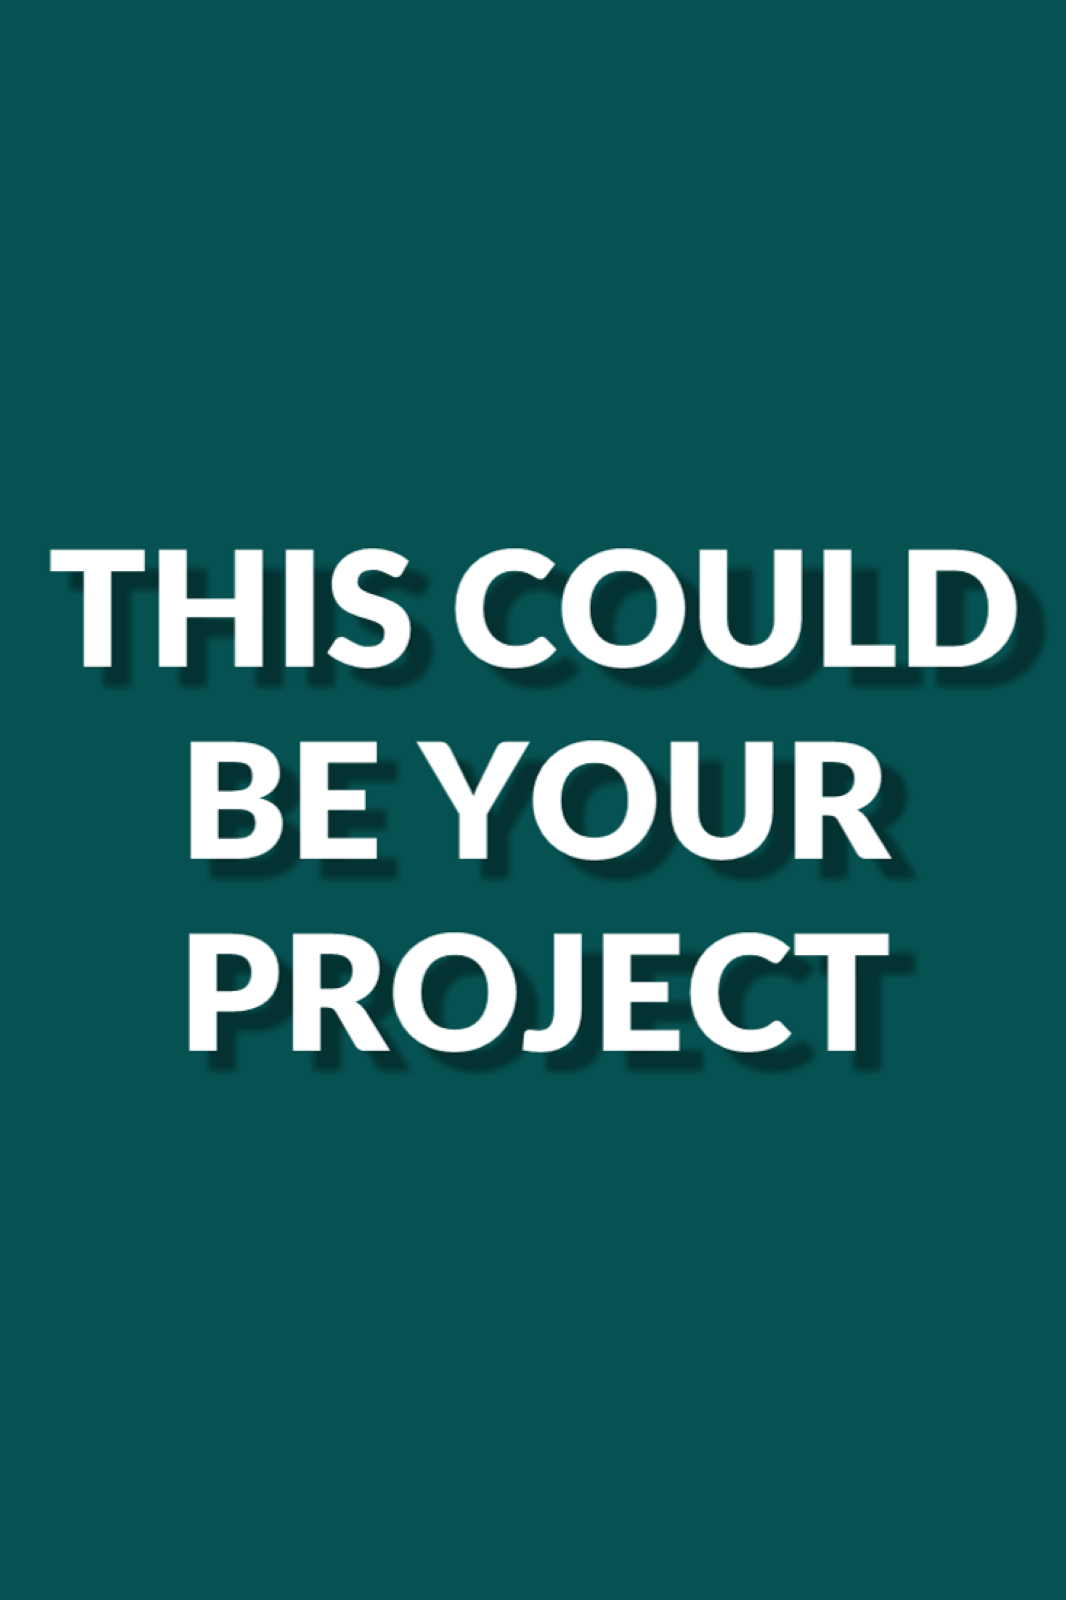 Banner of text saying 'this could be your project'